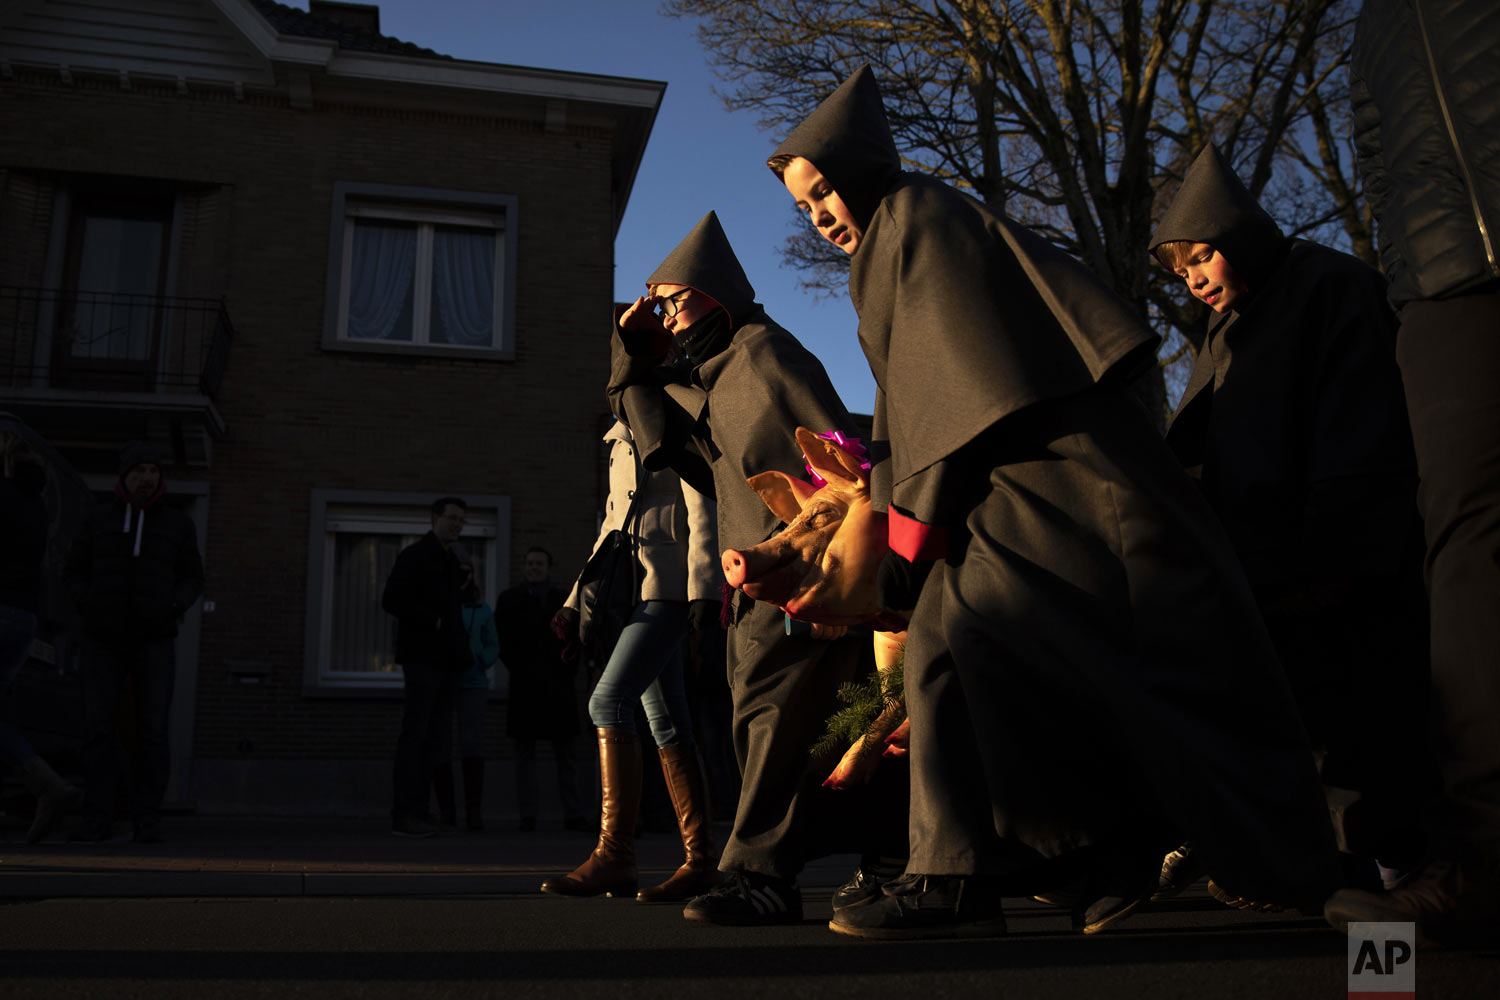  Hooded youths carry a slaughtered pig to a church during Saint Anthony celebrations in the village of Ingooigem, Belgium, on Sunday, Jan. 20, 2019. During the local celebration for the patron saint of animals, hooded twelve-year-olds along with othe